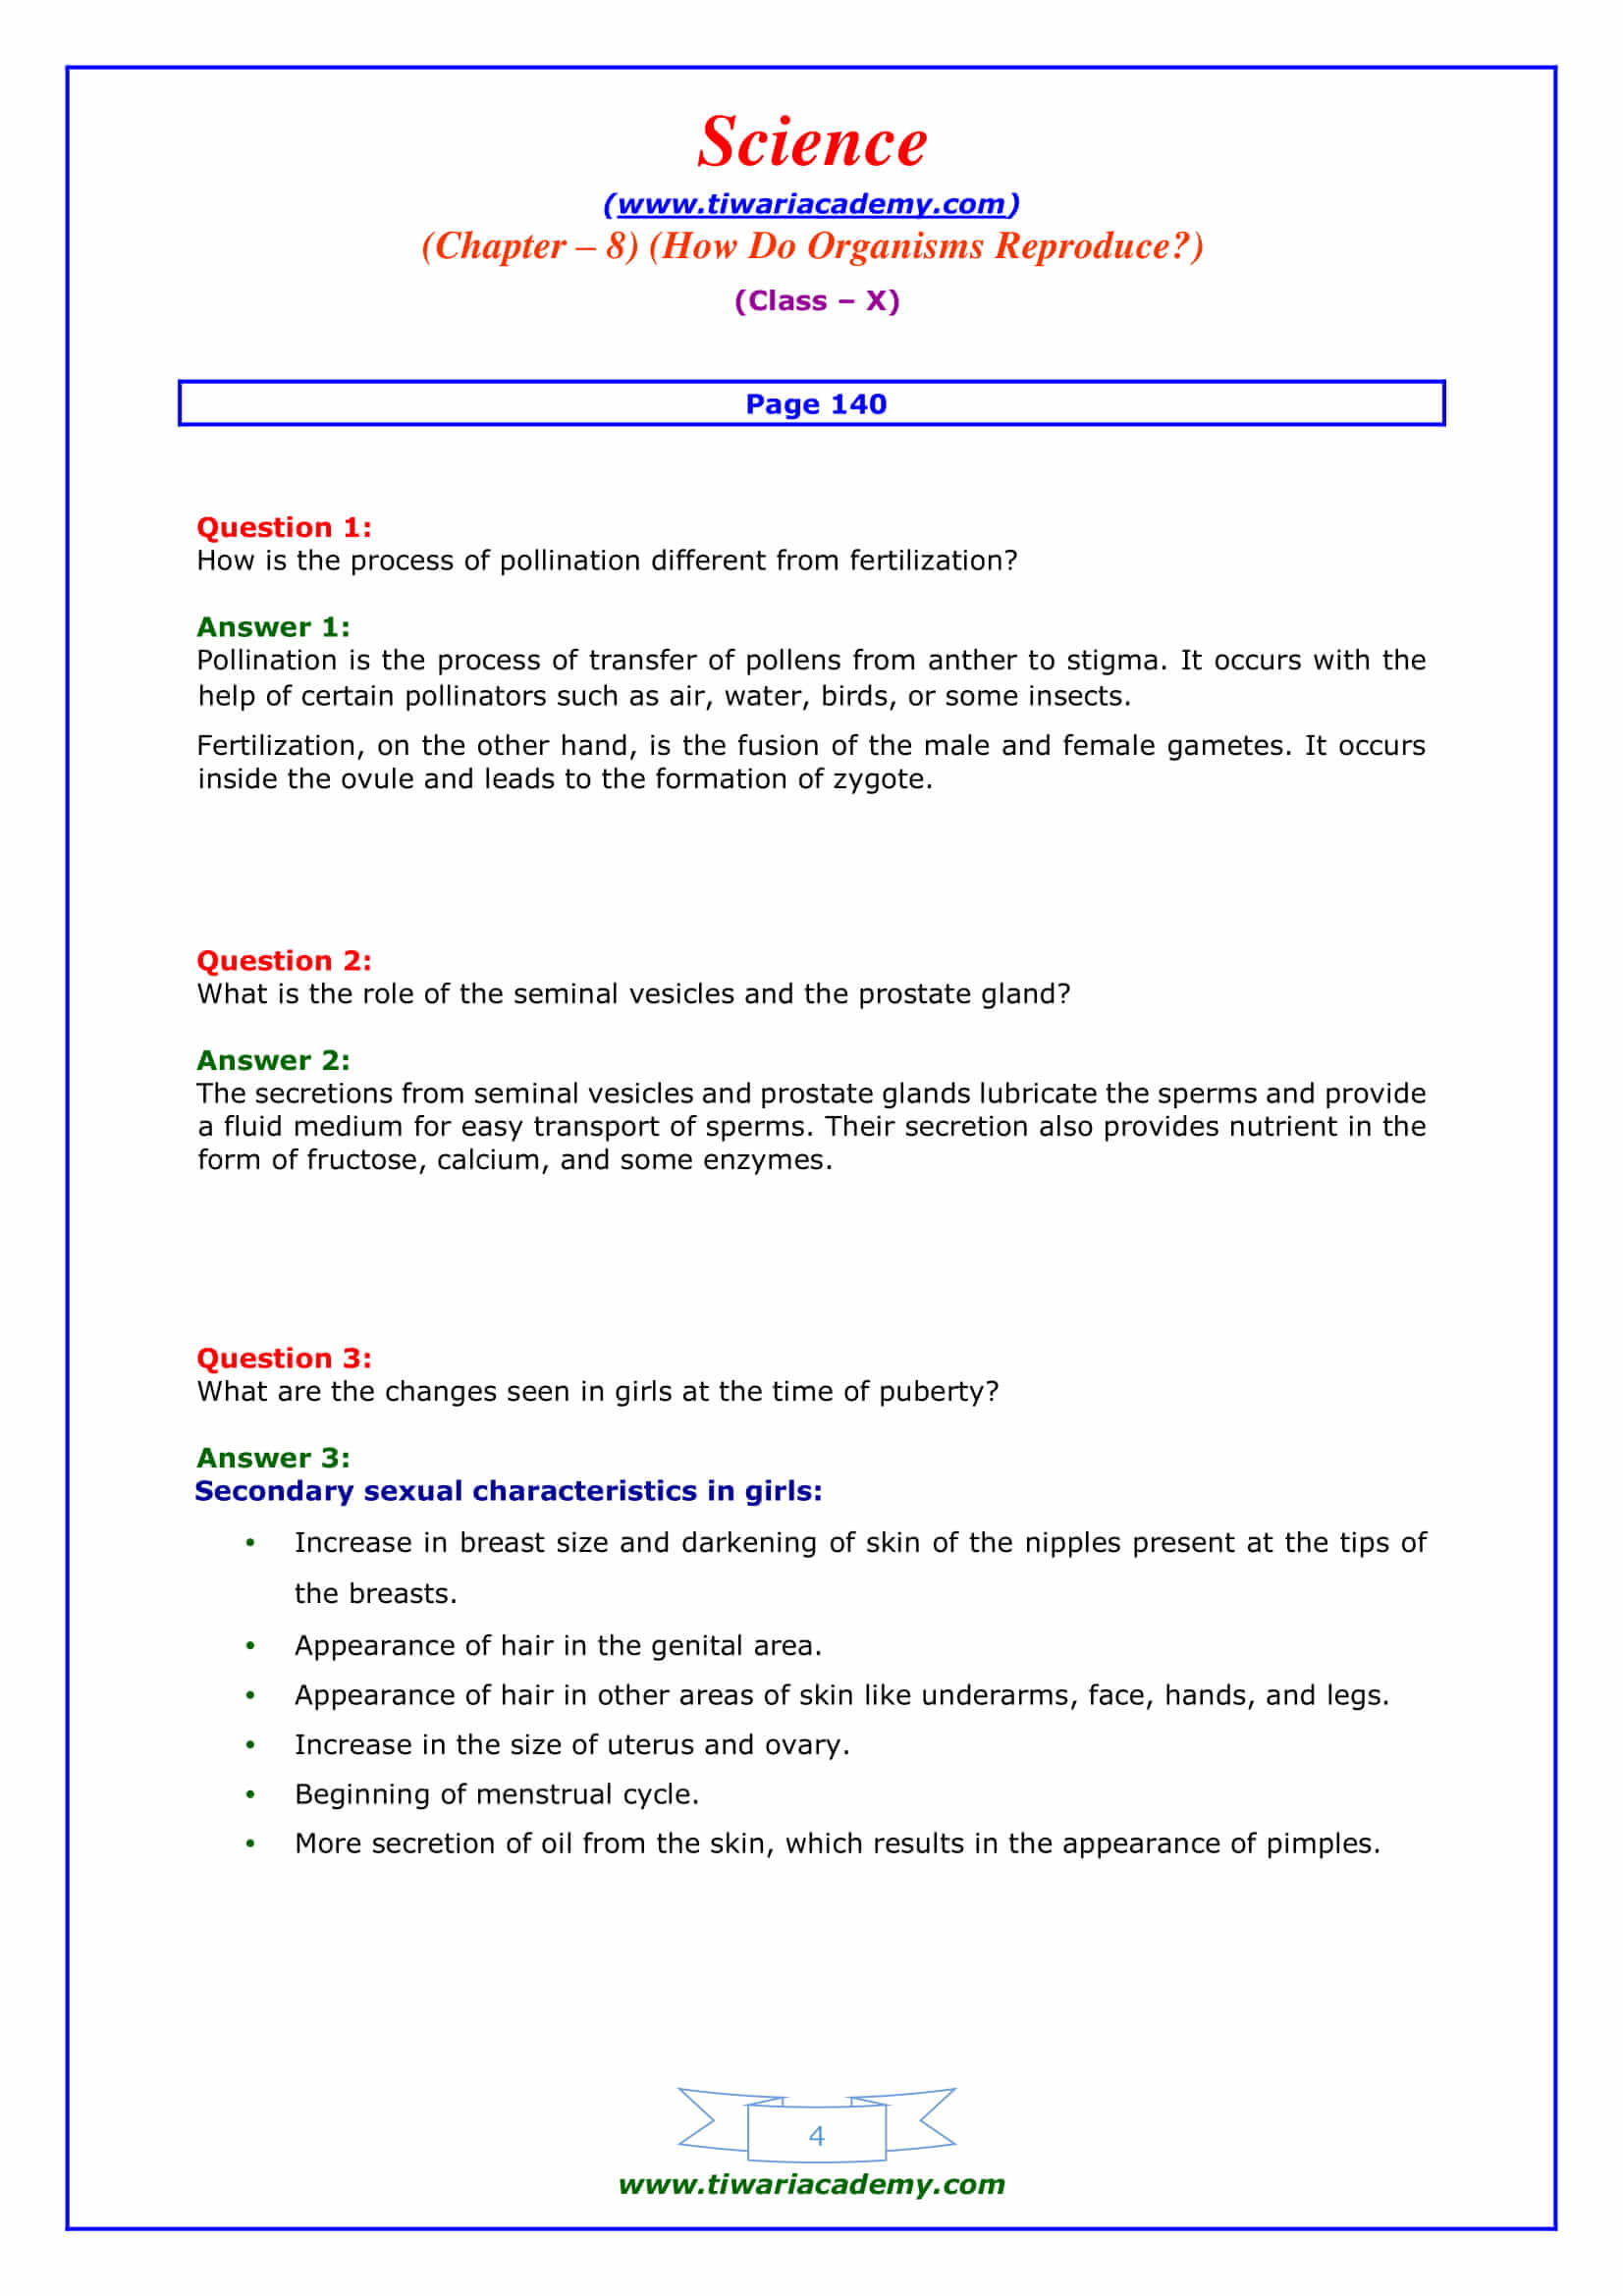 Class 10 Science Chapter 8 page 140